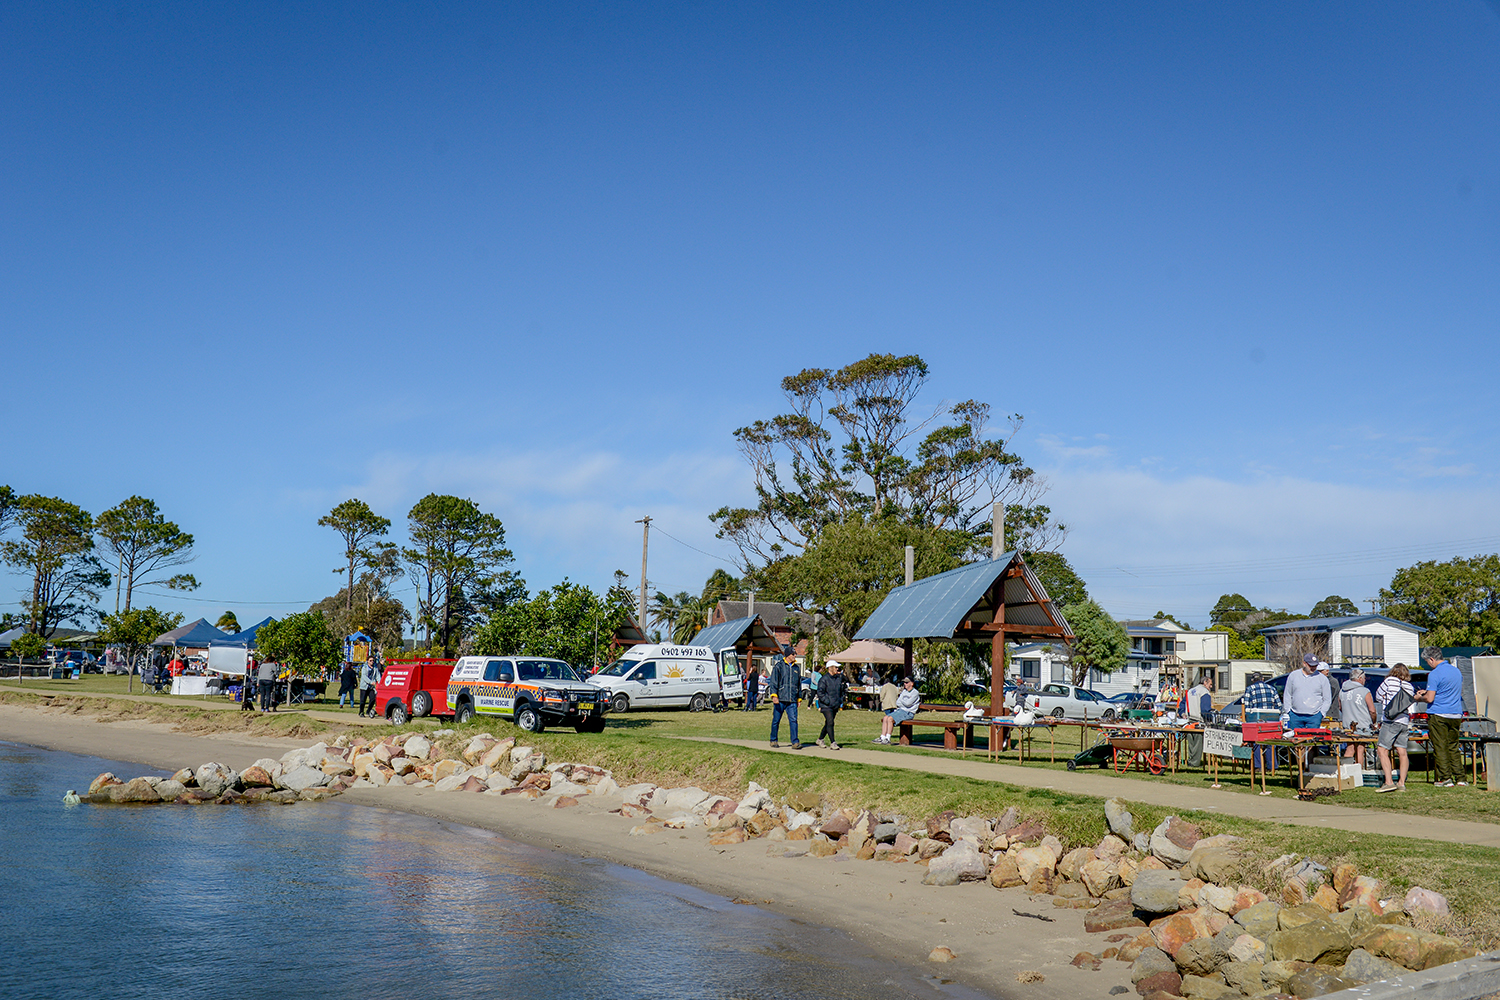 Community markets being held near the shorefront.